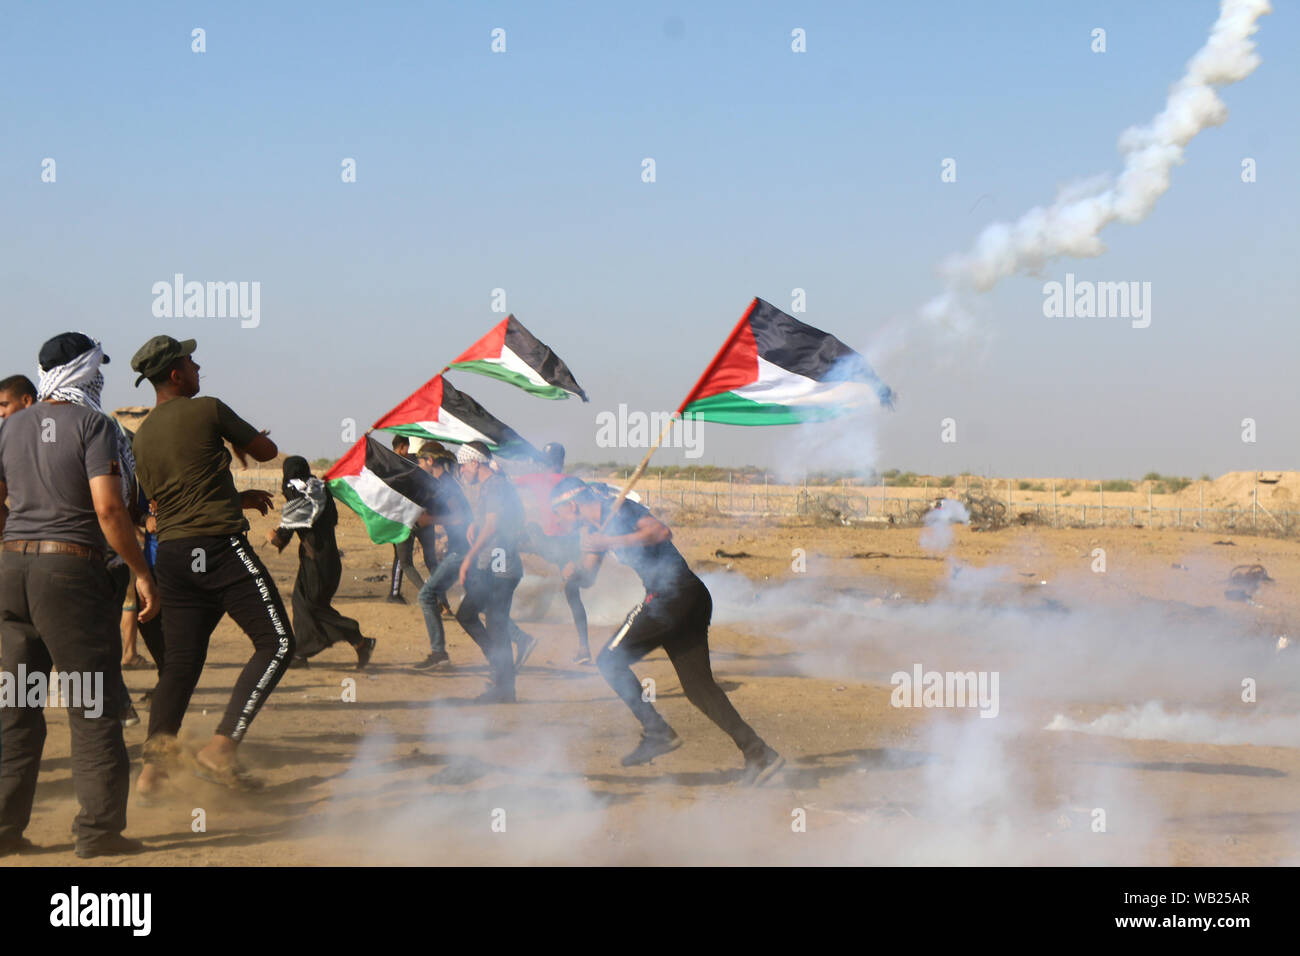 Khan Younis, Gaza Strip, Palestinian Territory. 23rd Aug, 2019. Palestinian protesters clash with Israeli troops following the tents protest where Palestinians demand the right to return to their homeland at the Israel-Gaza border, in Khan Younis in the southern Gaza Strip, August 23, 2019 Credit: Mariam Dagga/APA Images/ZUMA Wire/Alamy Live News Stock Photo